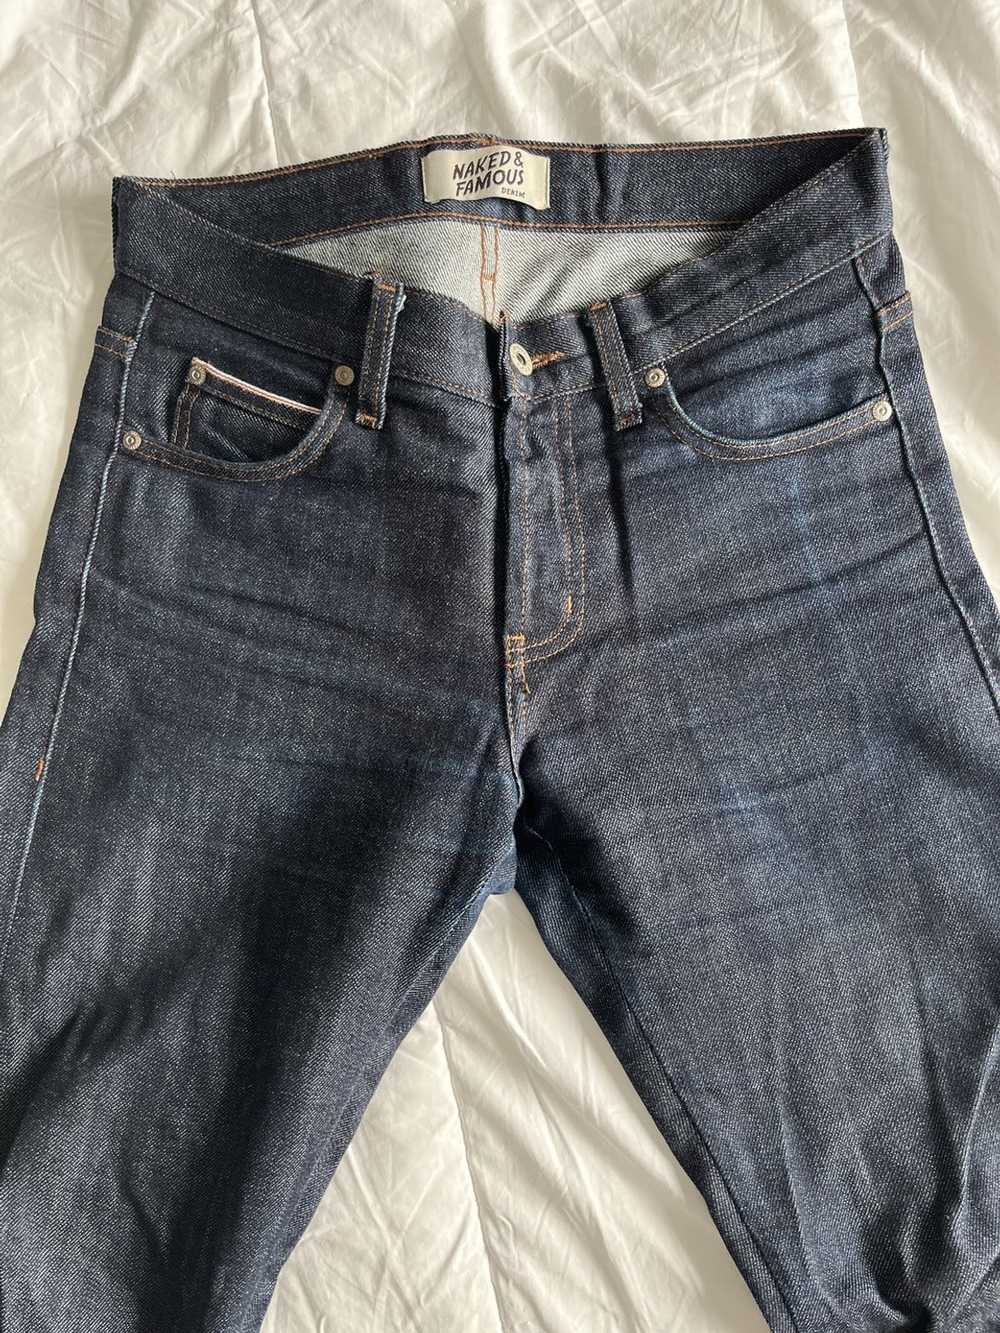 Naked & Famous Naked and Famous Stretch Selvedge - image 5